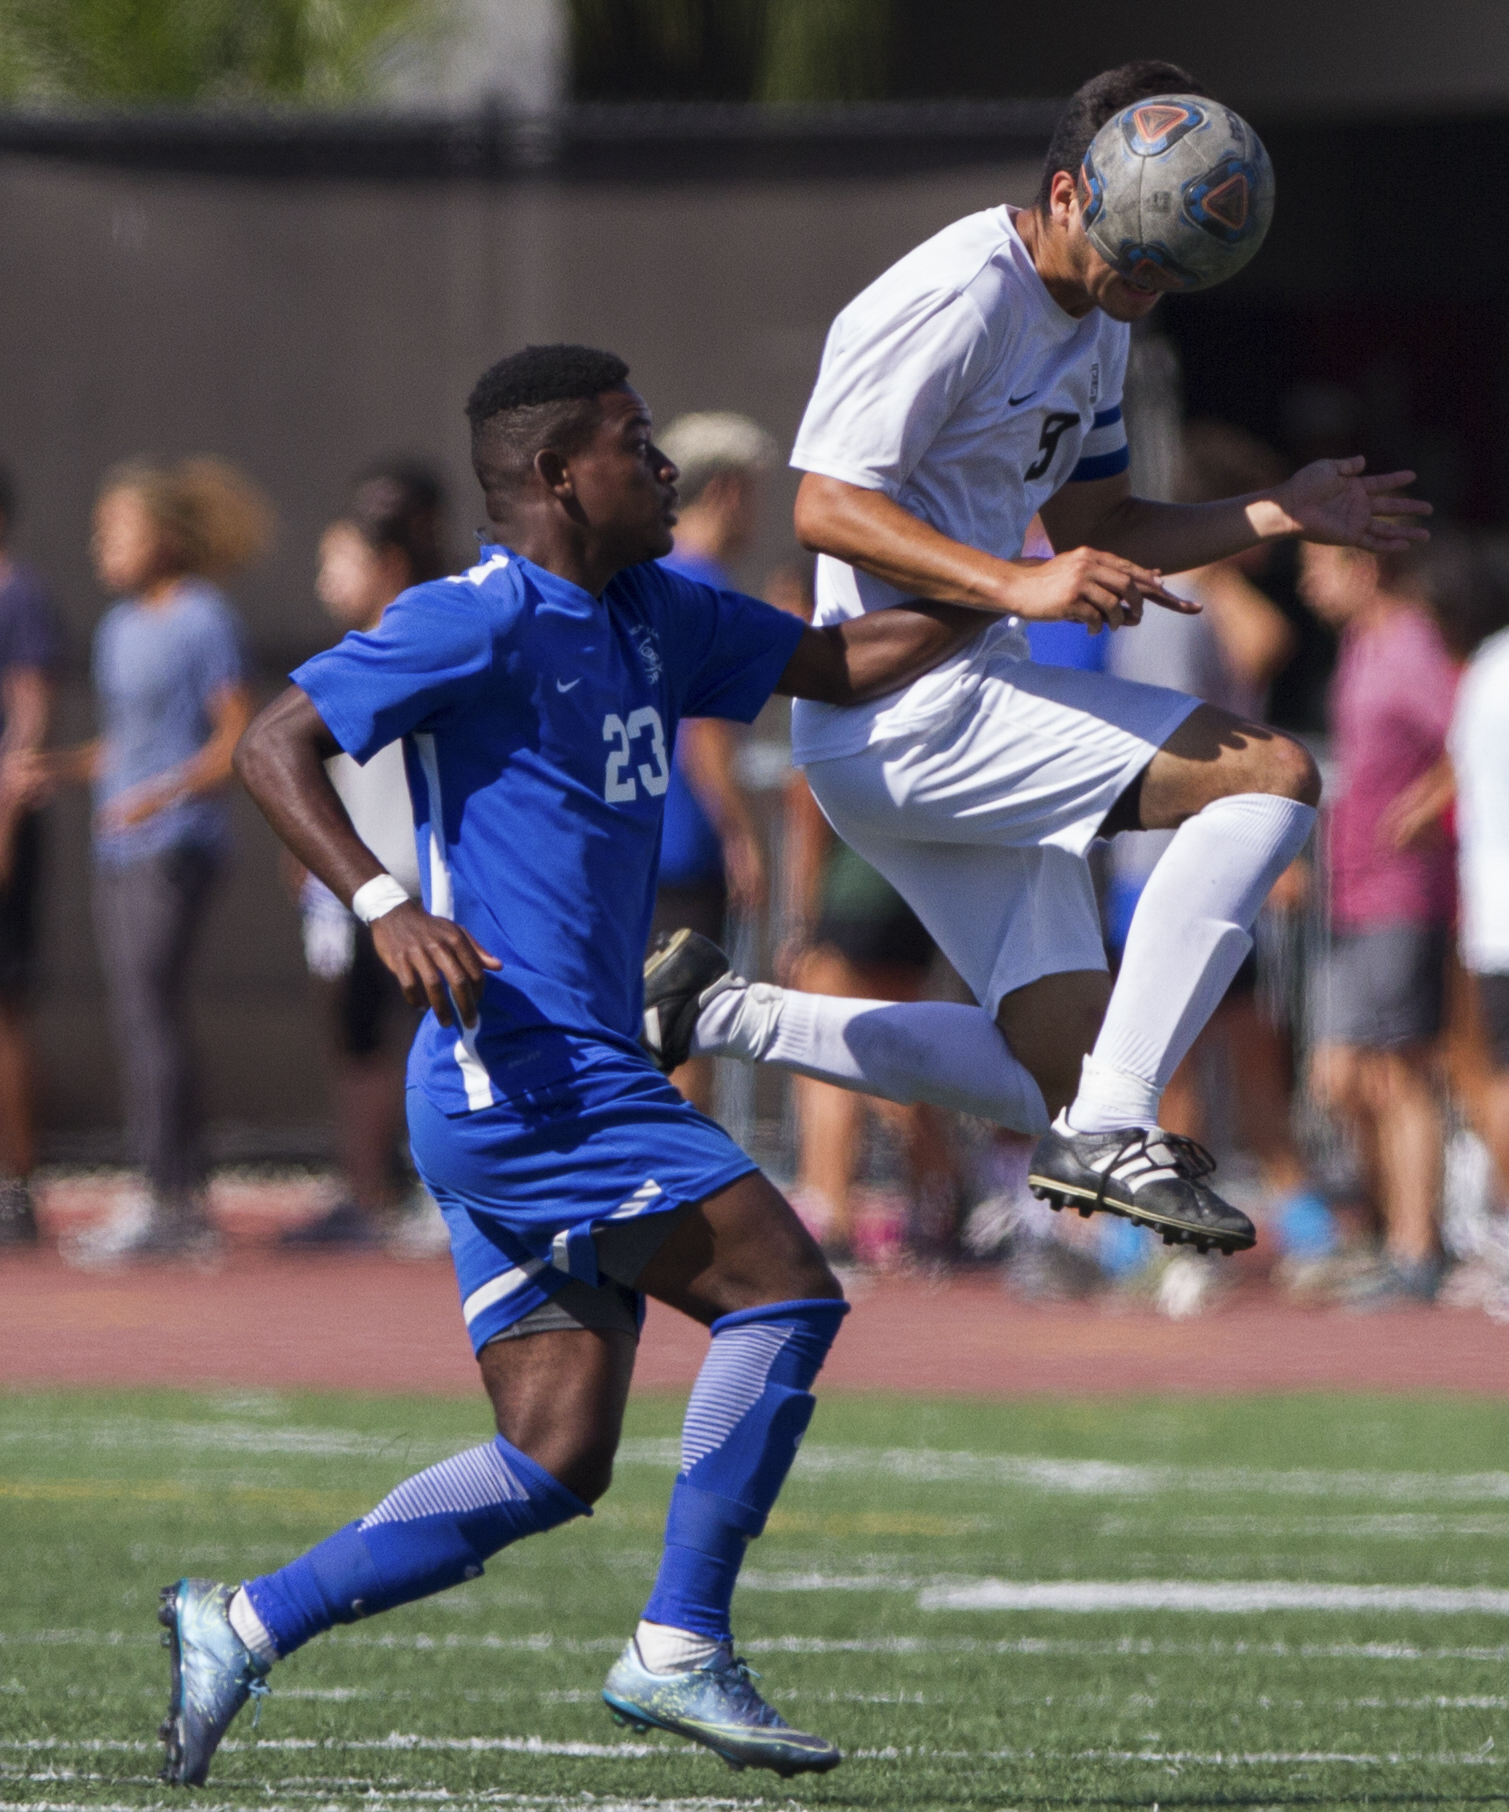  Santa Monica College Corsair Divine Sumbu (23) (L) attempts to get possession of the ball against Moorpark College Raider Angel Perez (9) (R) on Tuesday, October 10, 2017, on the Corsair Field at Santa Monica College in Santa Monica, California. The